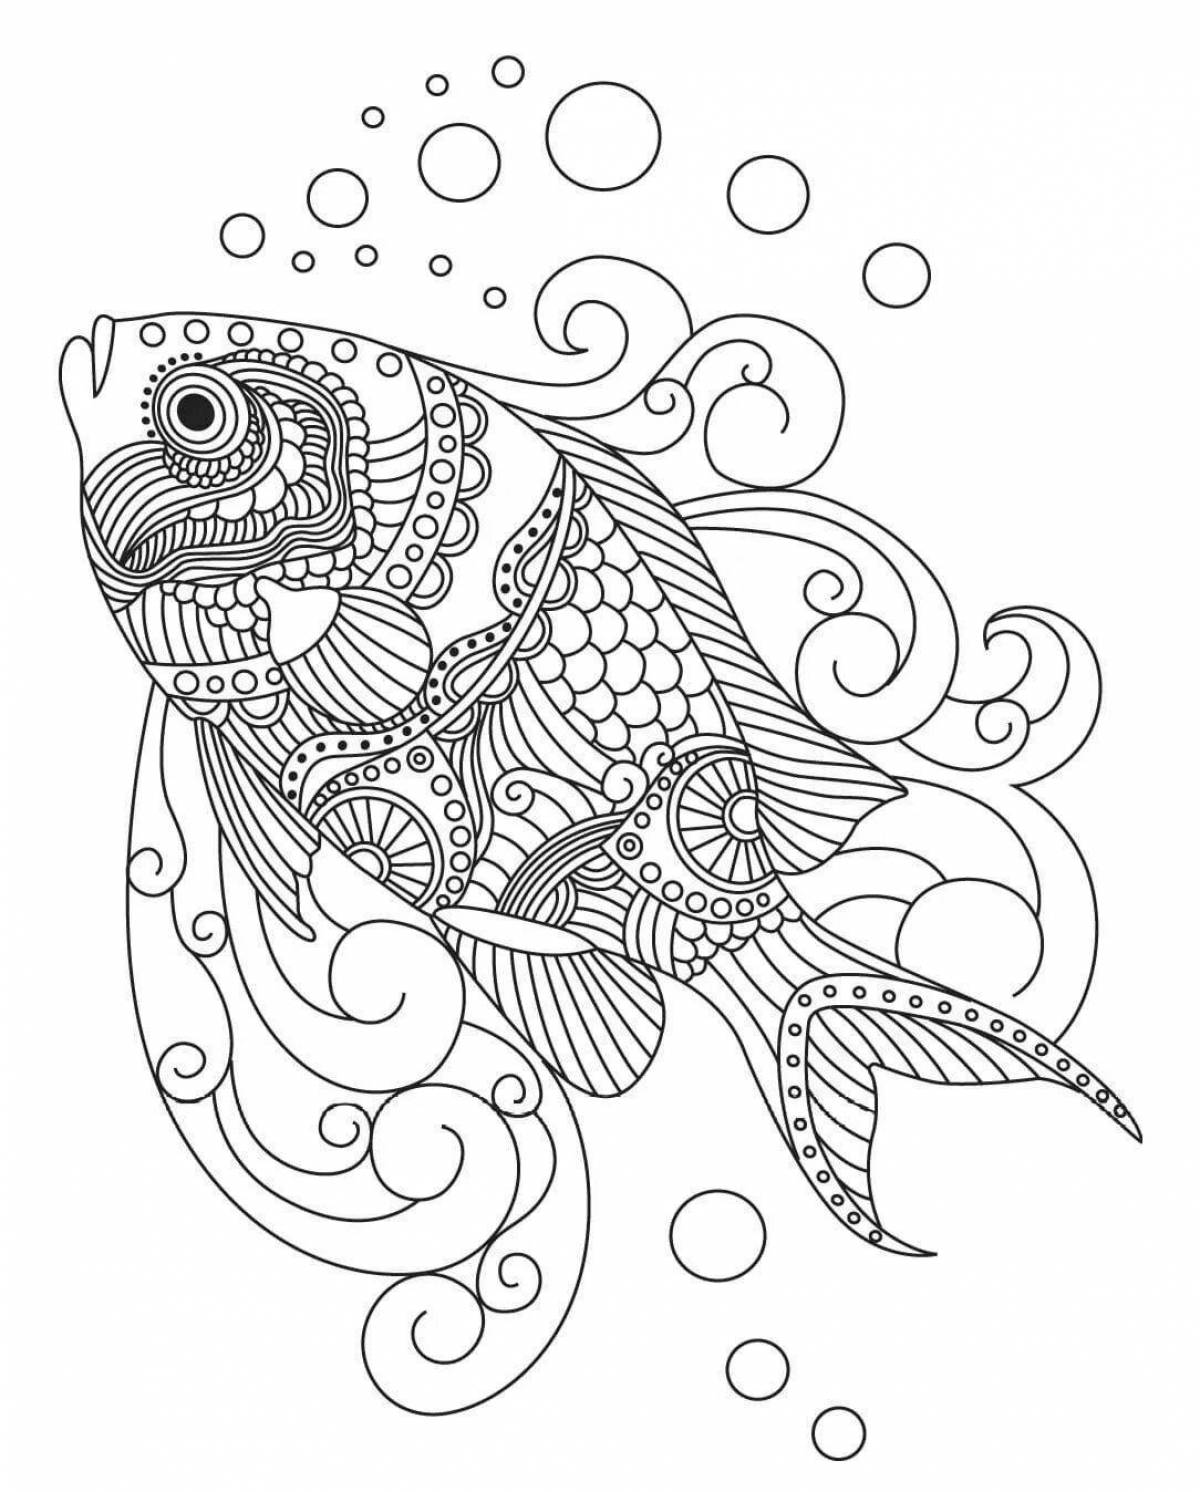 Animated anti-stress animal coloring book for kids